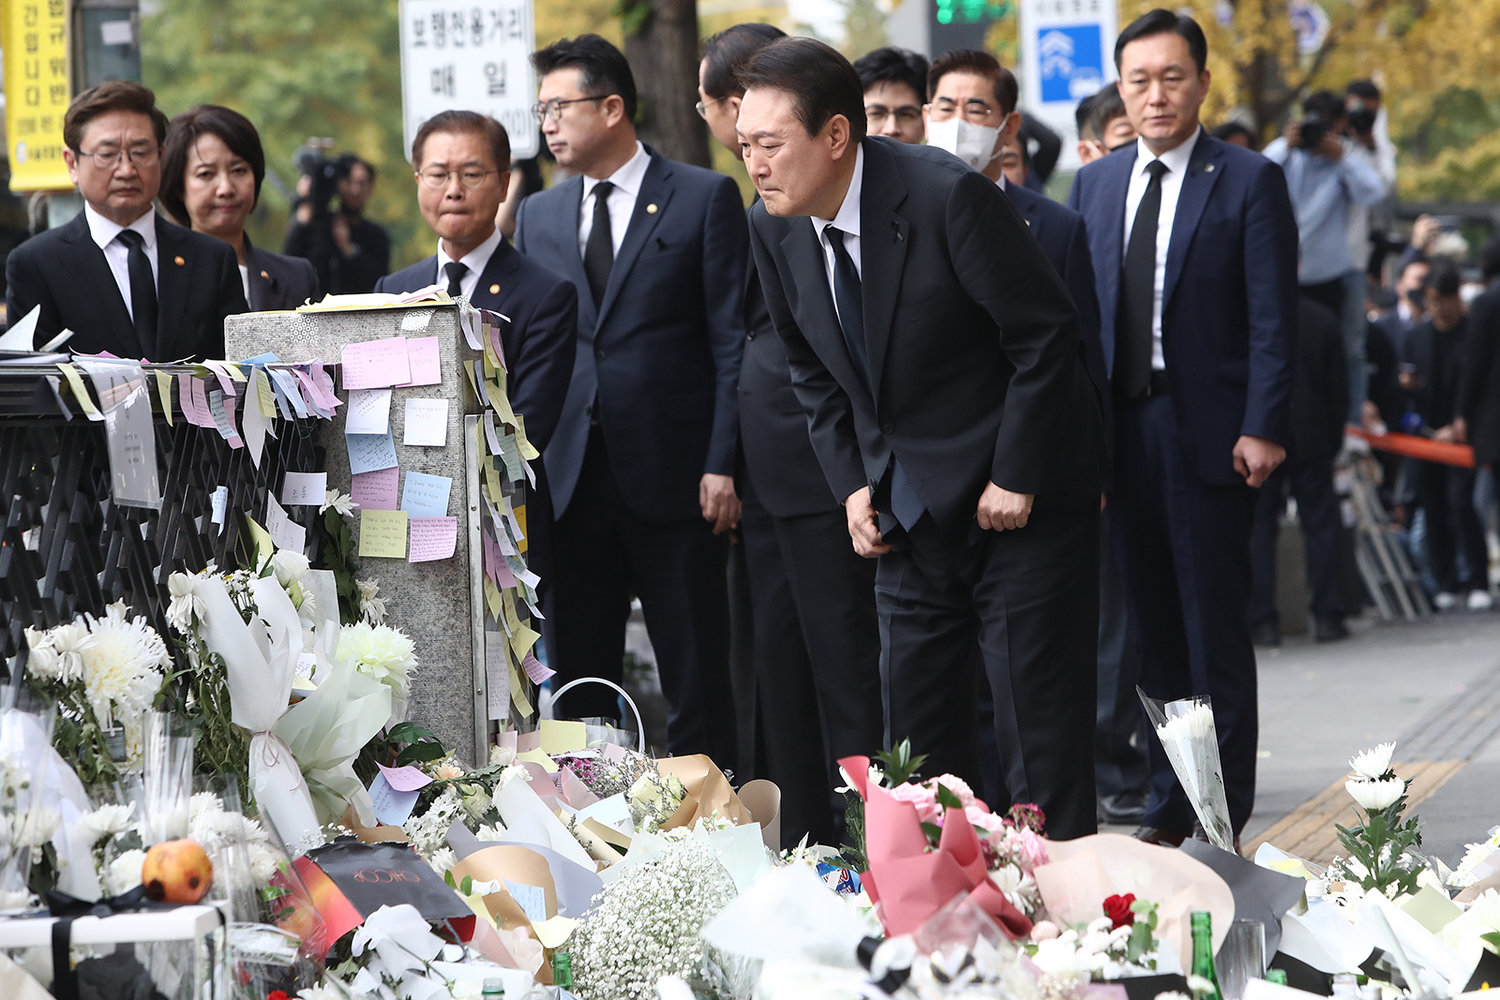 South Korean President Yoon Suk Yeol reads messages written by mouners while paying tribute to the victims of the Halloween celebration stampede, on the street near the scene on Nov. 1, 2022, in Seoul, South Korea. (Chung Sung-Jun/Getty Images/TNS)